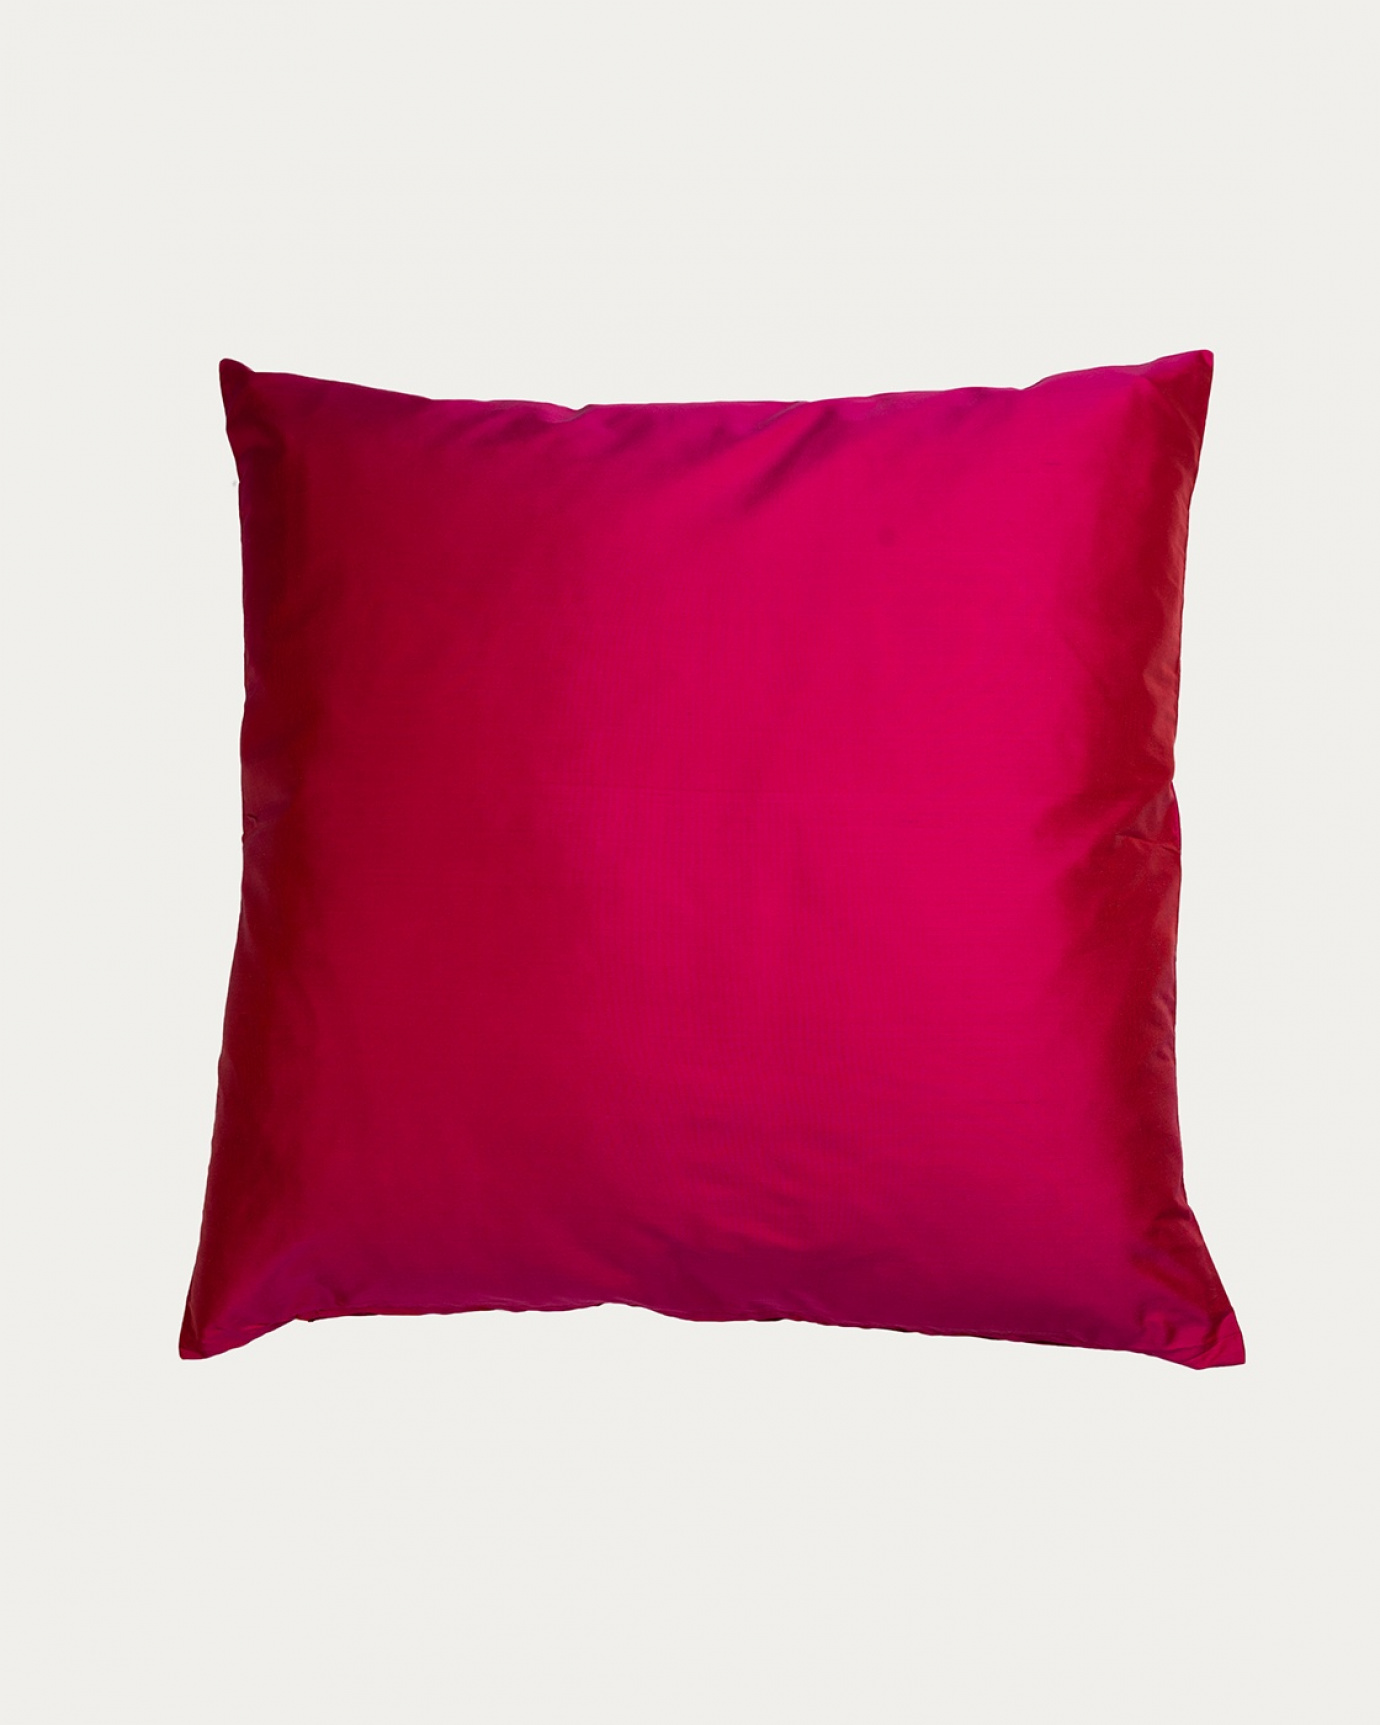 Product image fuchsia red DUPION cushion cover made of 100% dupion silk from LINUM DESIGN. Size 50x50 cm.